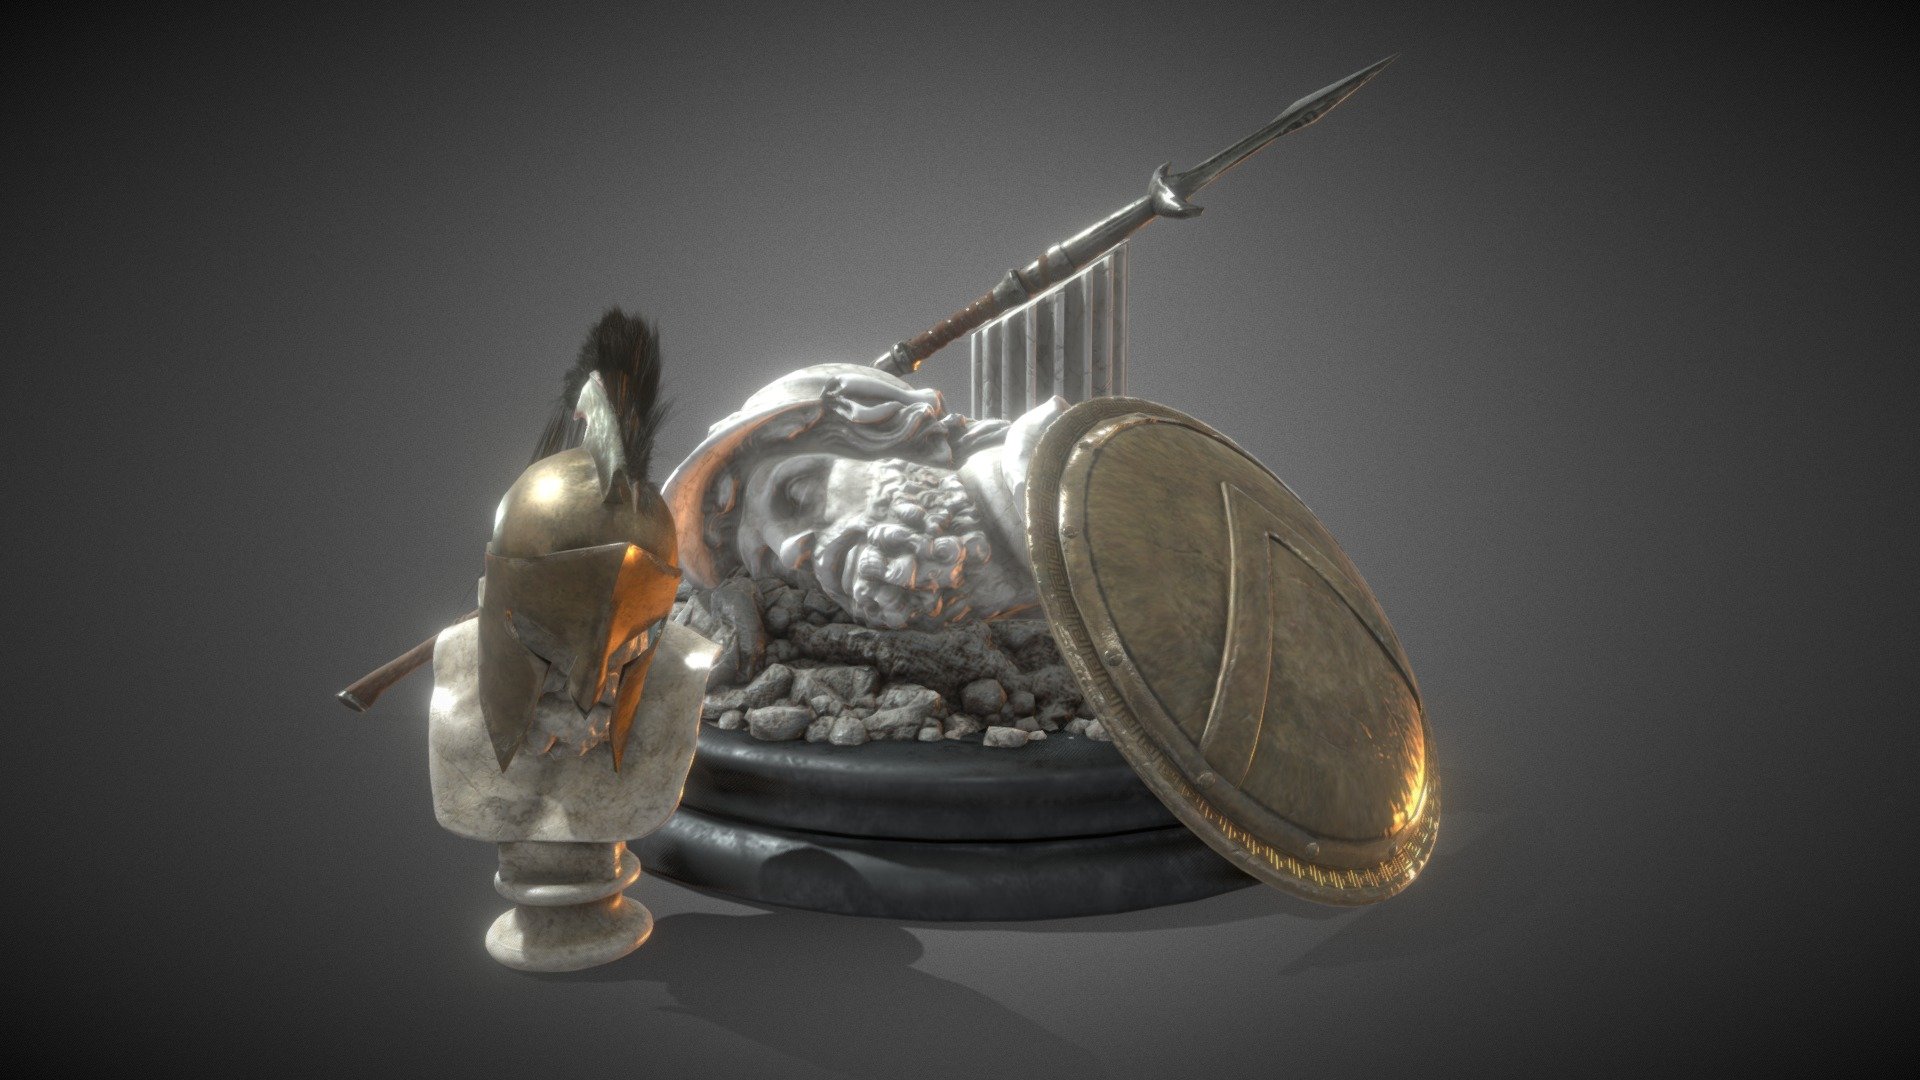 A cool set of weapon i made,sculpted in lightwave and zbrush and textured in Substance Painter .
it contains an helmet,spear,shield and a pedestal with some ruins of columns and statues 3d model